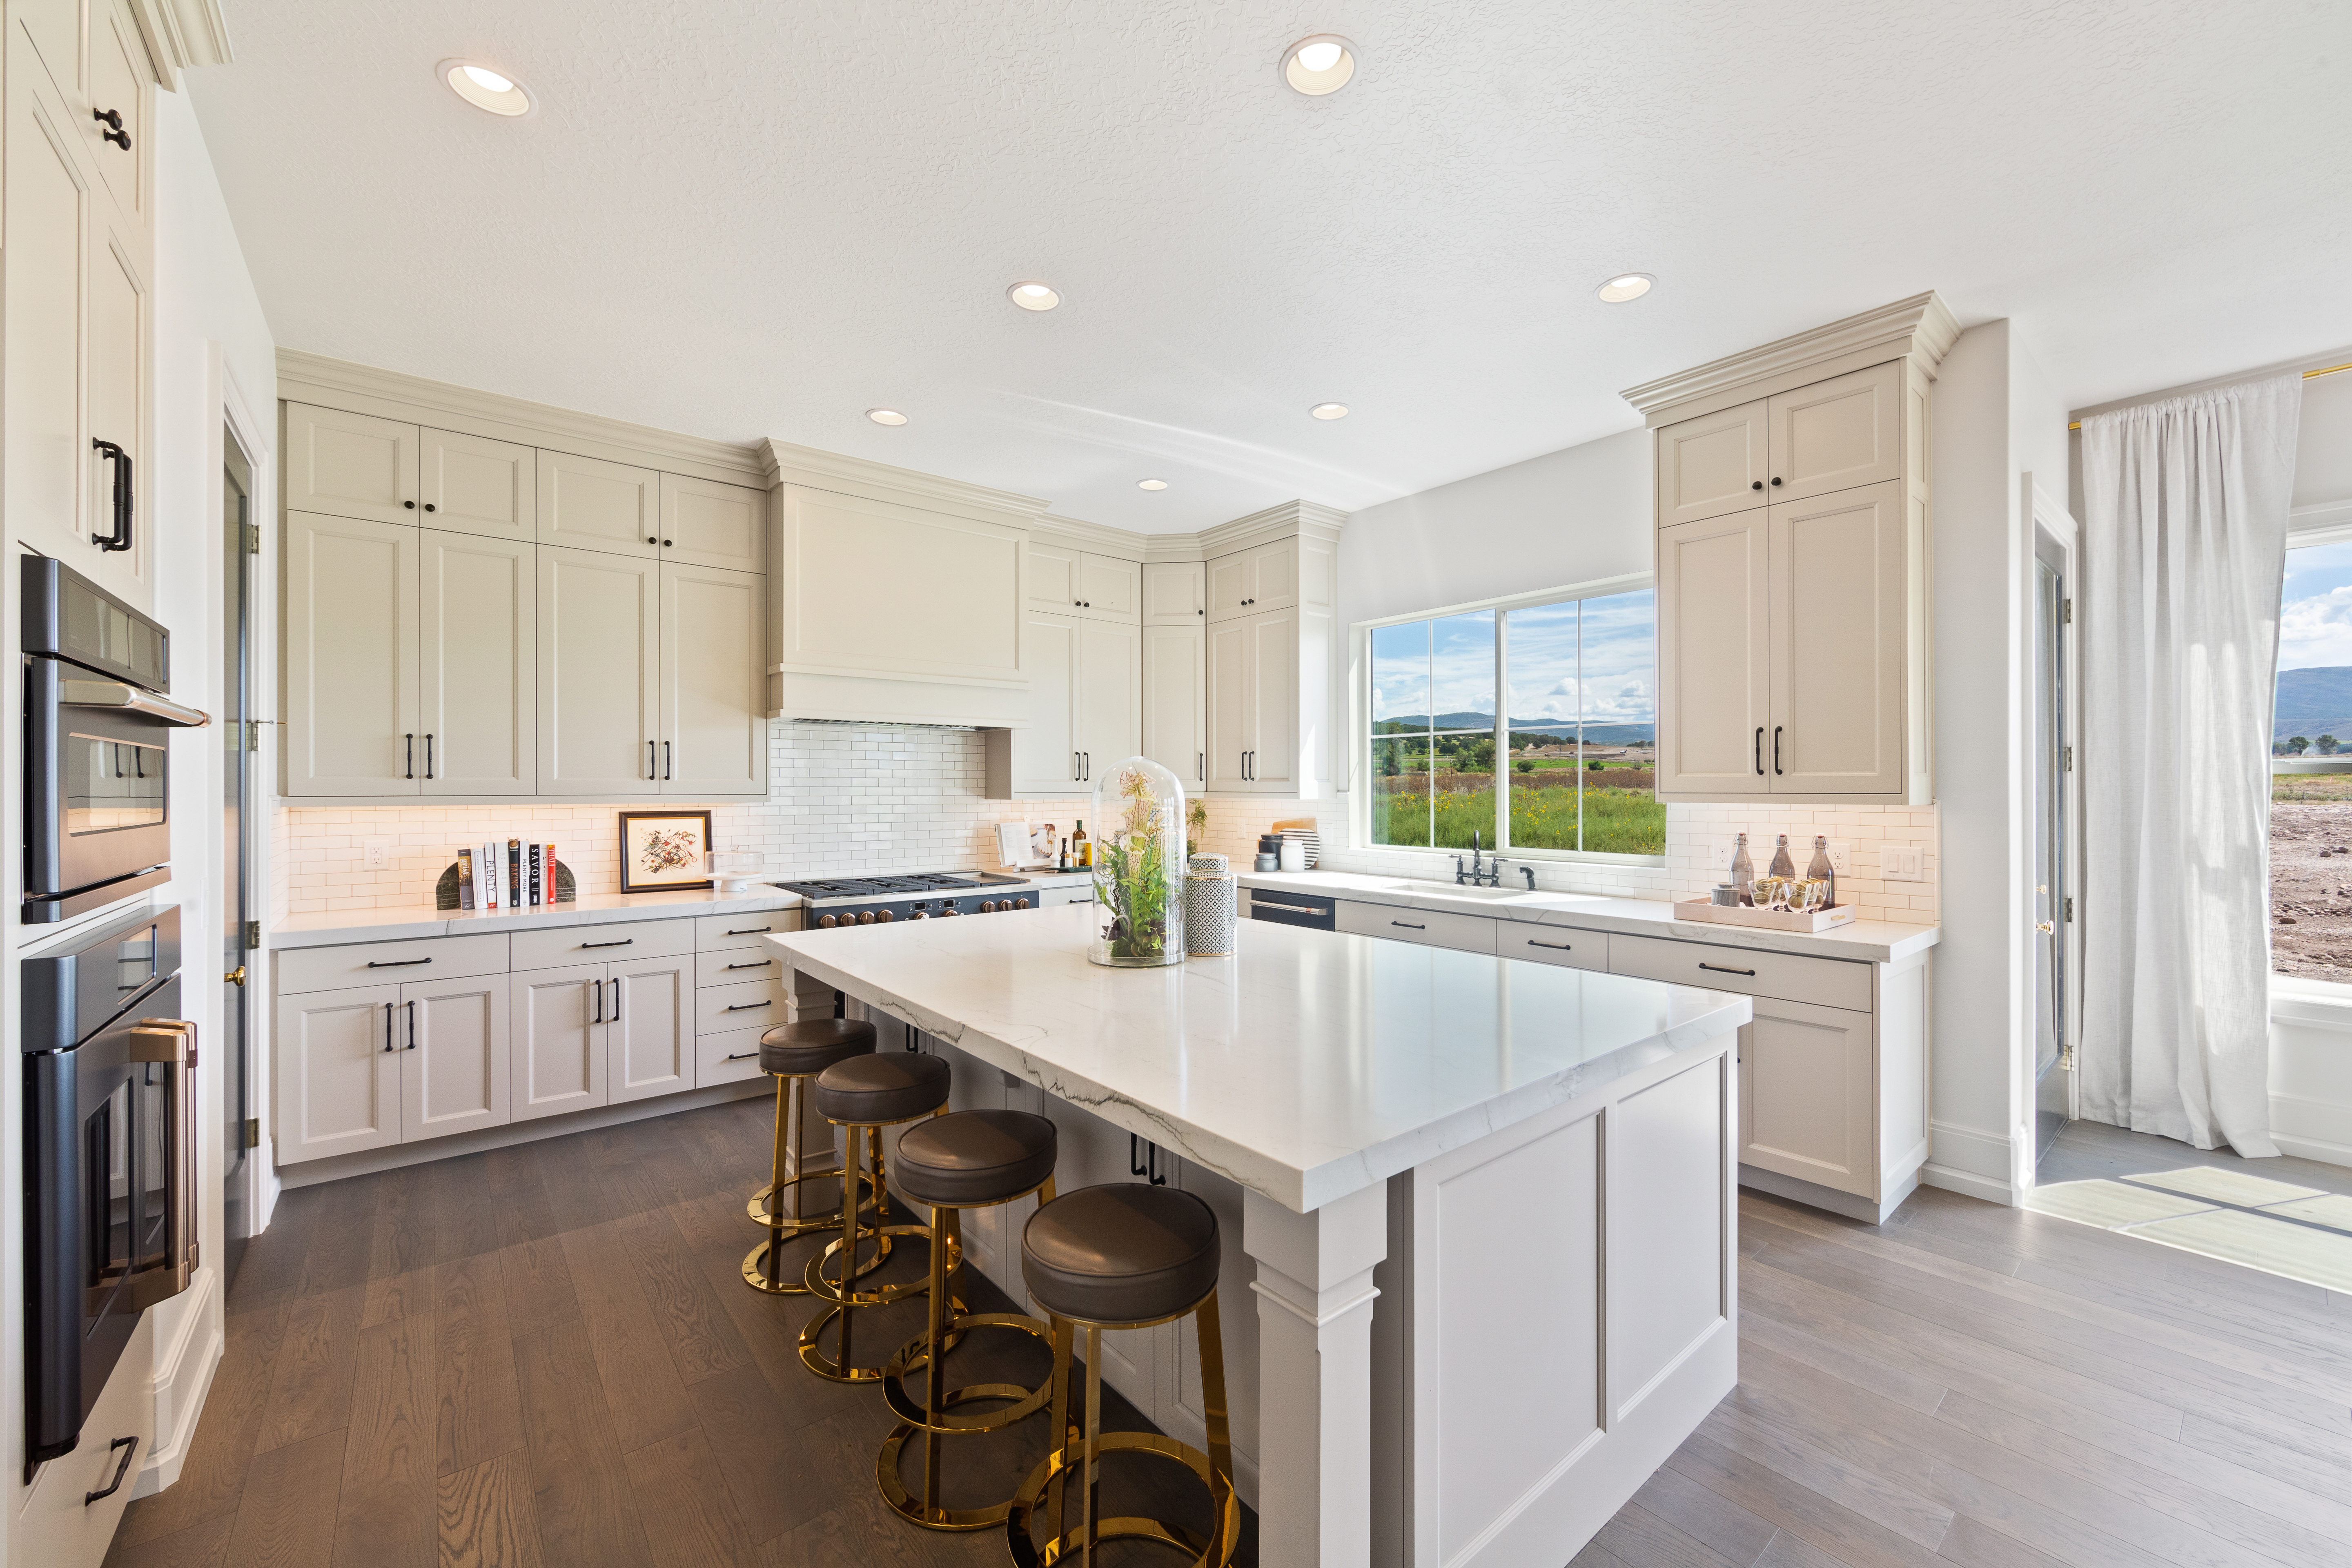 GE Appliances in Ivory Homes